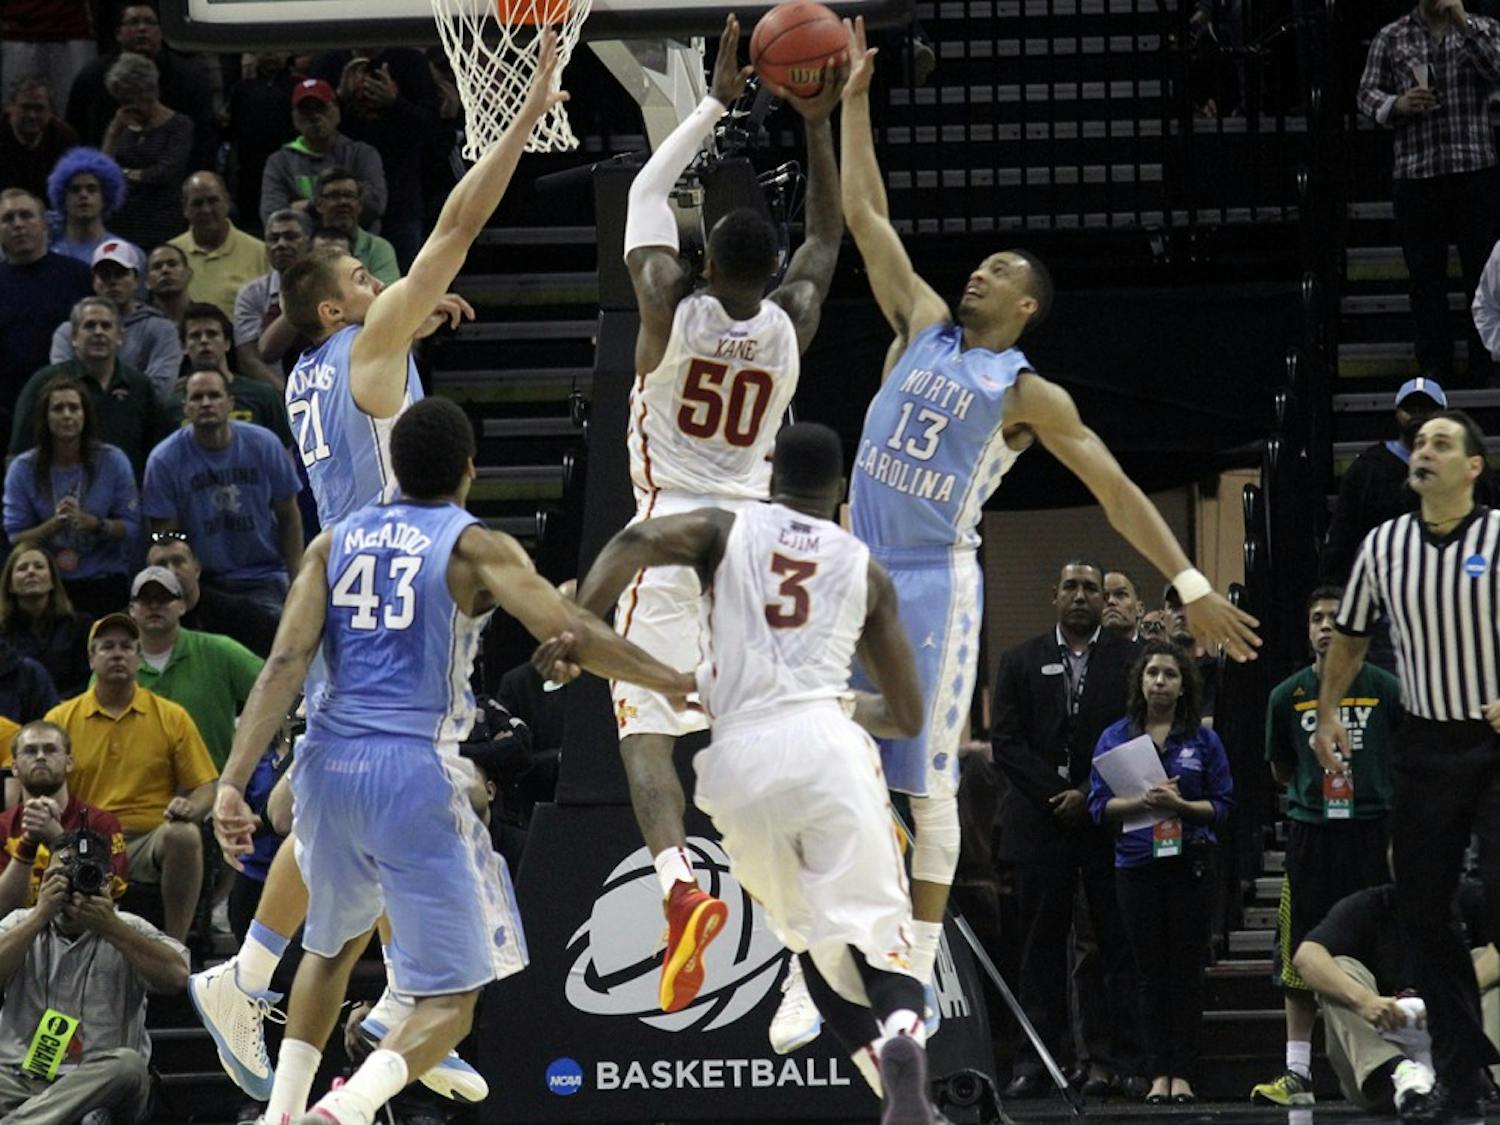 Iowa State's DeAndre Kane hit the game winning shot over Jackson Simmons and JP Tokoto. The UNC men's basketball team lost to Iowa State 85-83 in the third round of the NCAA tournament.